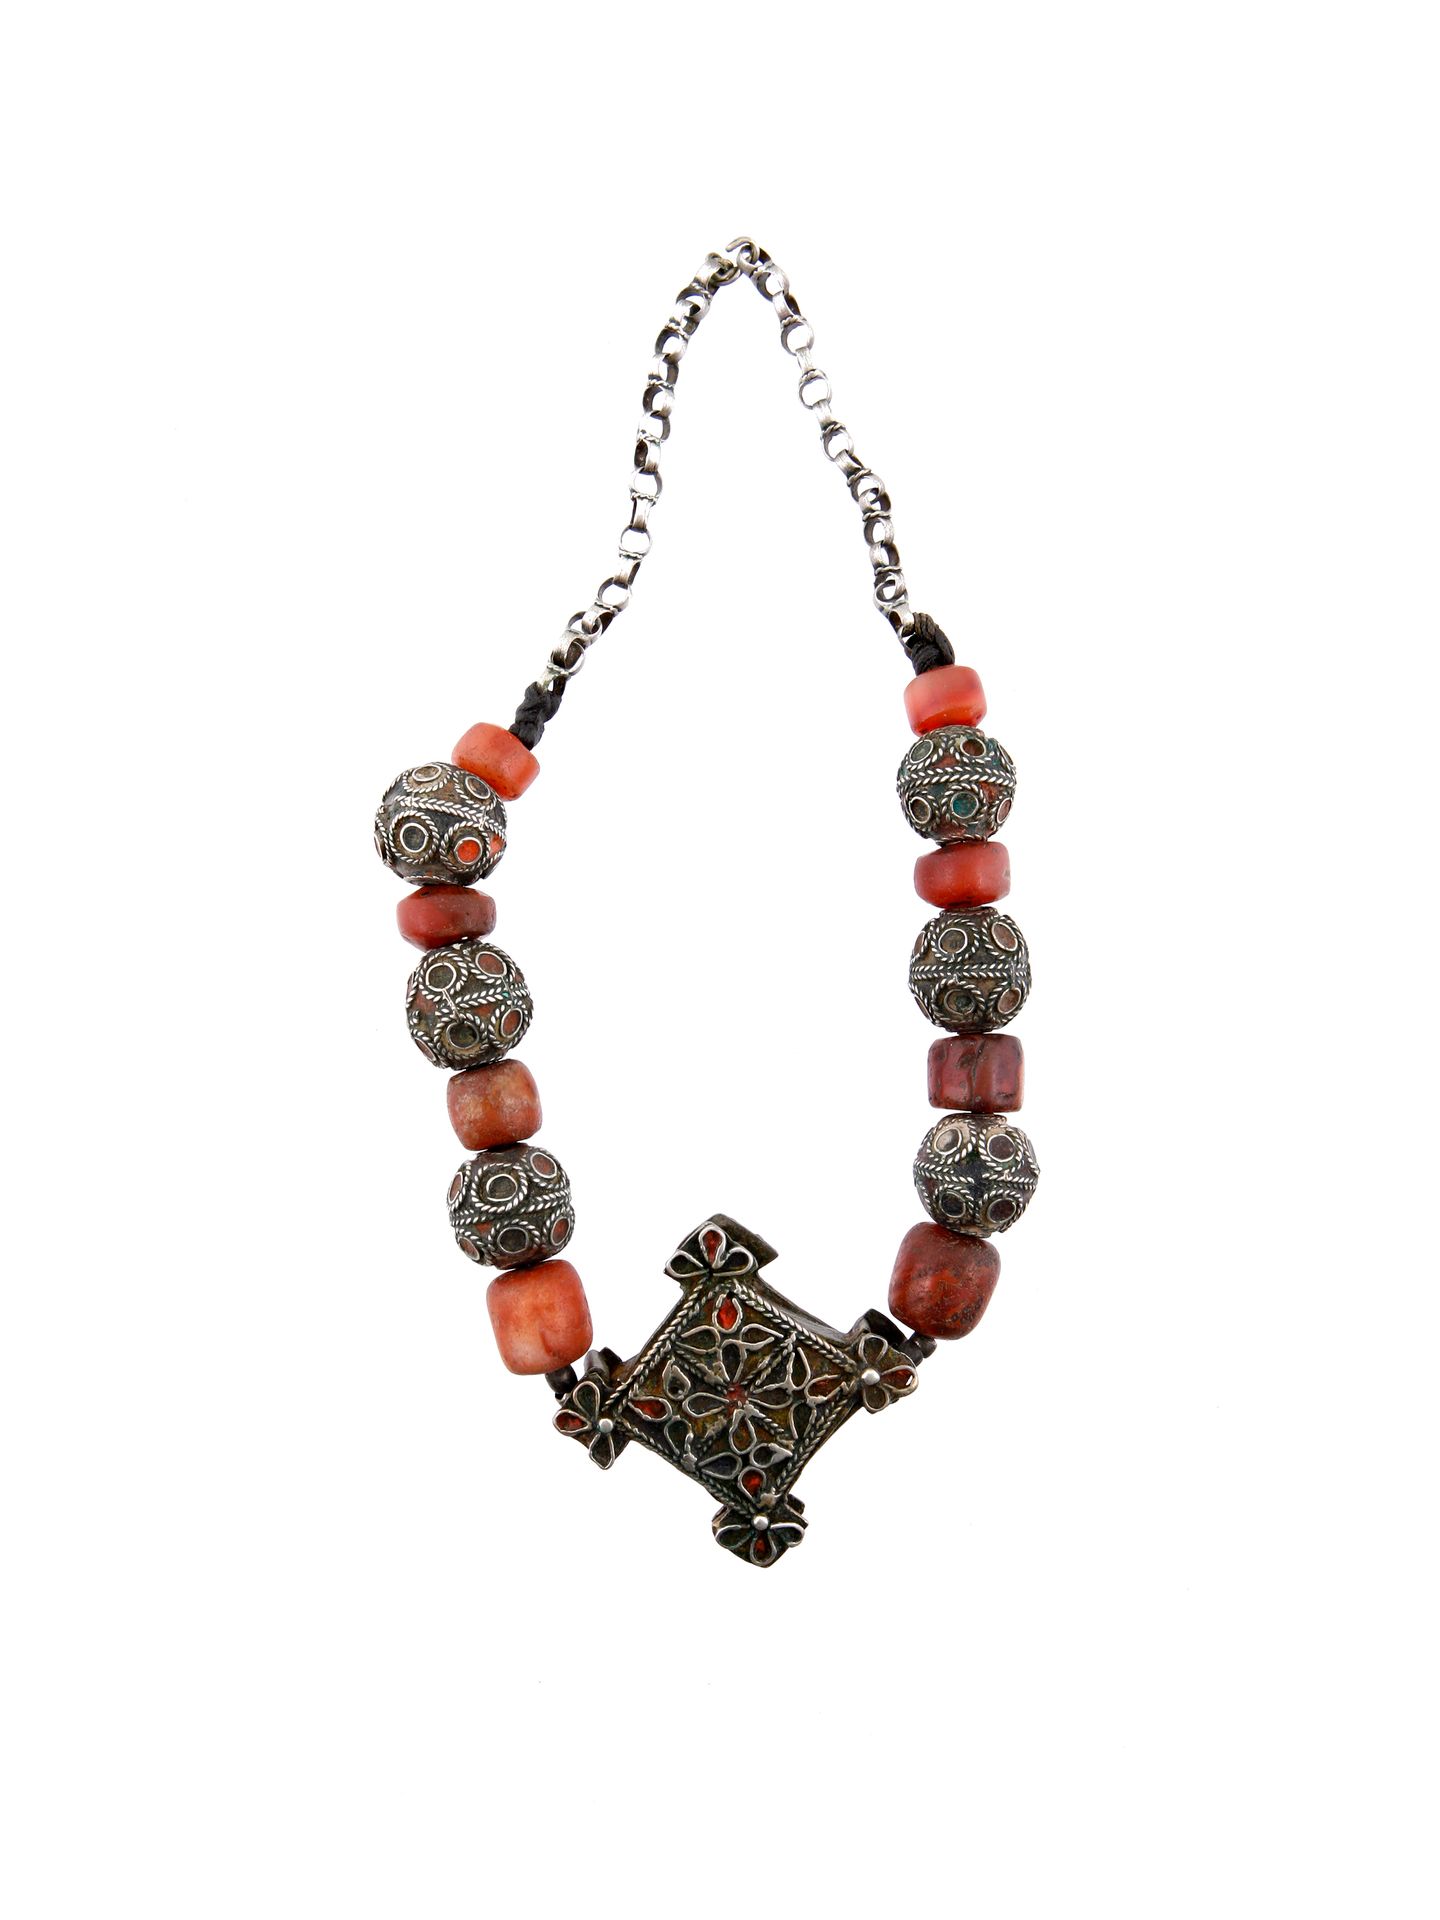 A Berber Necklace with a central Pendant Necklace with central jewelry pendant

&hellip;